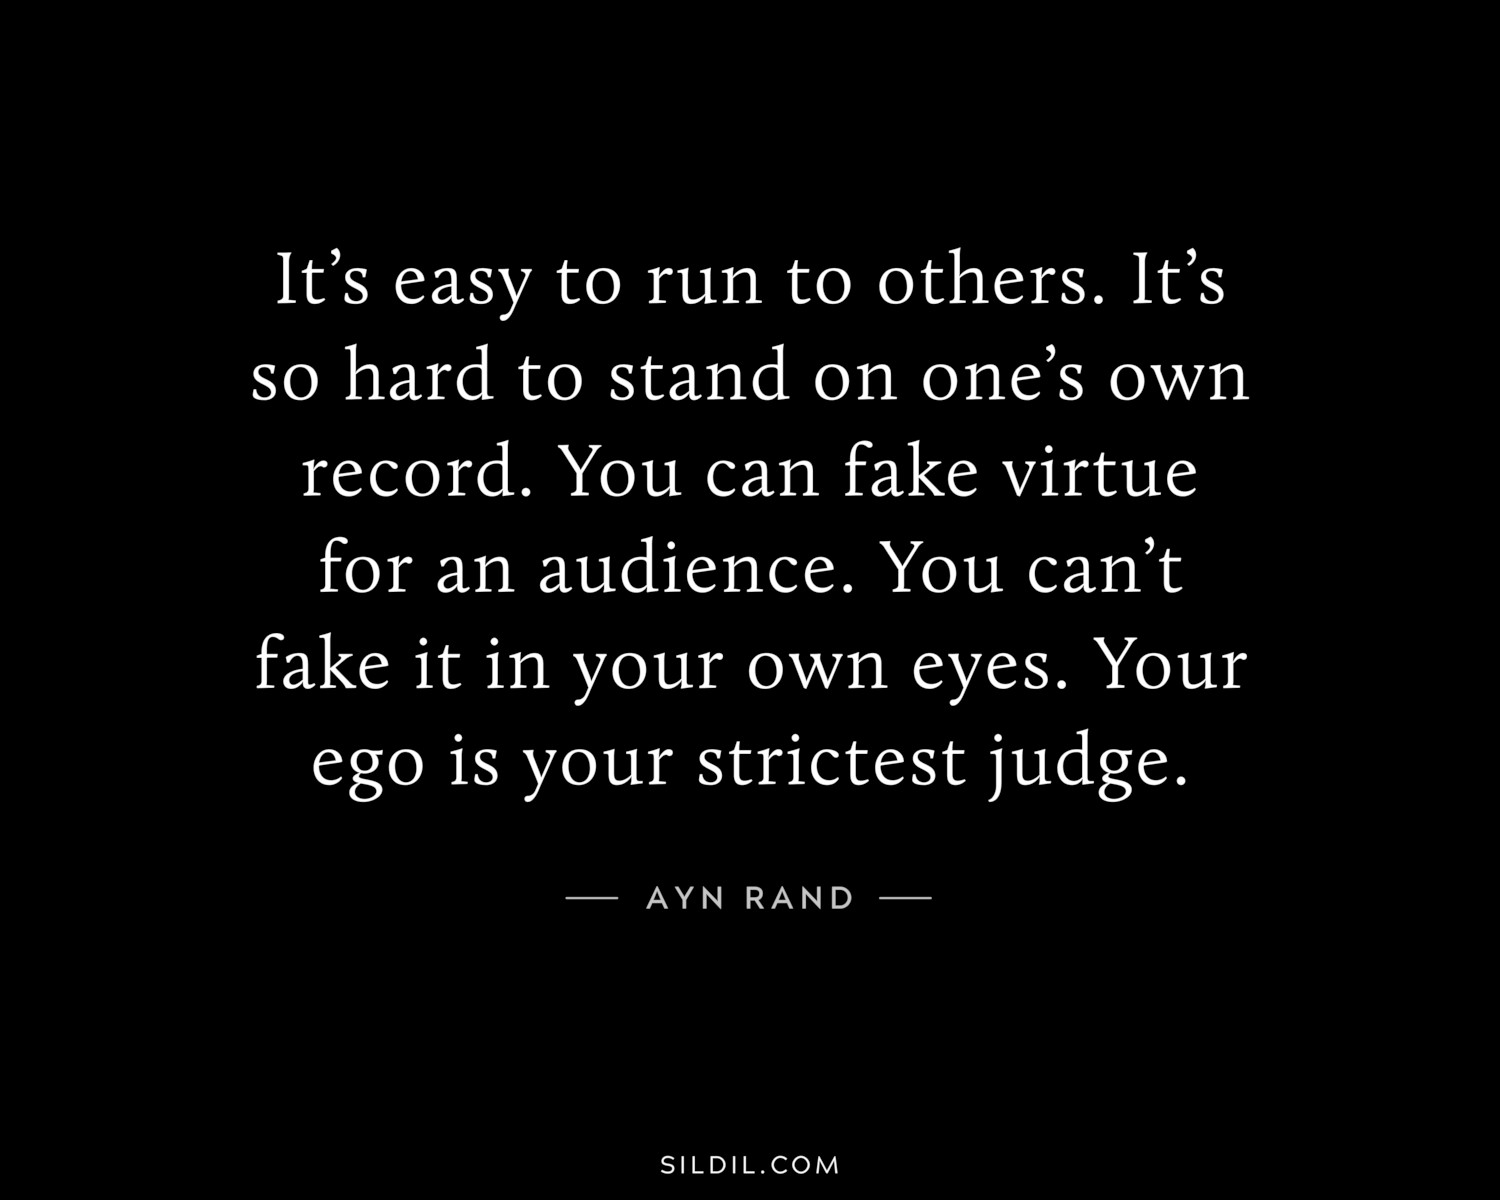 It’s easy to run to others. It’s so hard to stand on one’s own record. You can fake virtue for an audience. You can’t fake it in your own eyes. Your ego is your strictest judge.